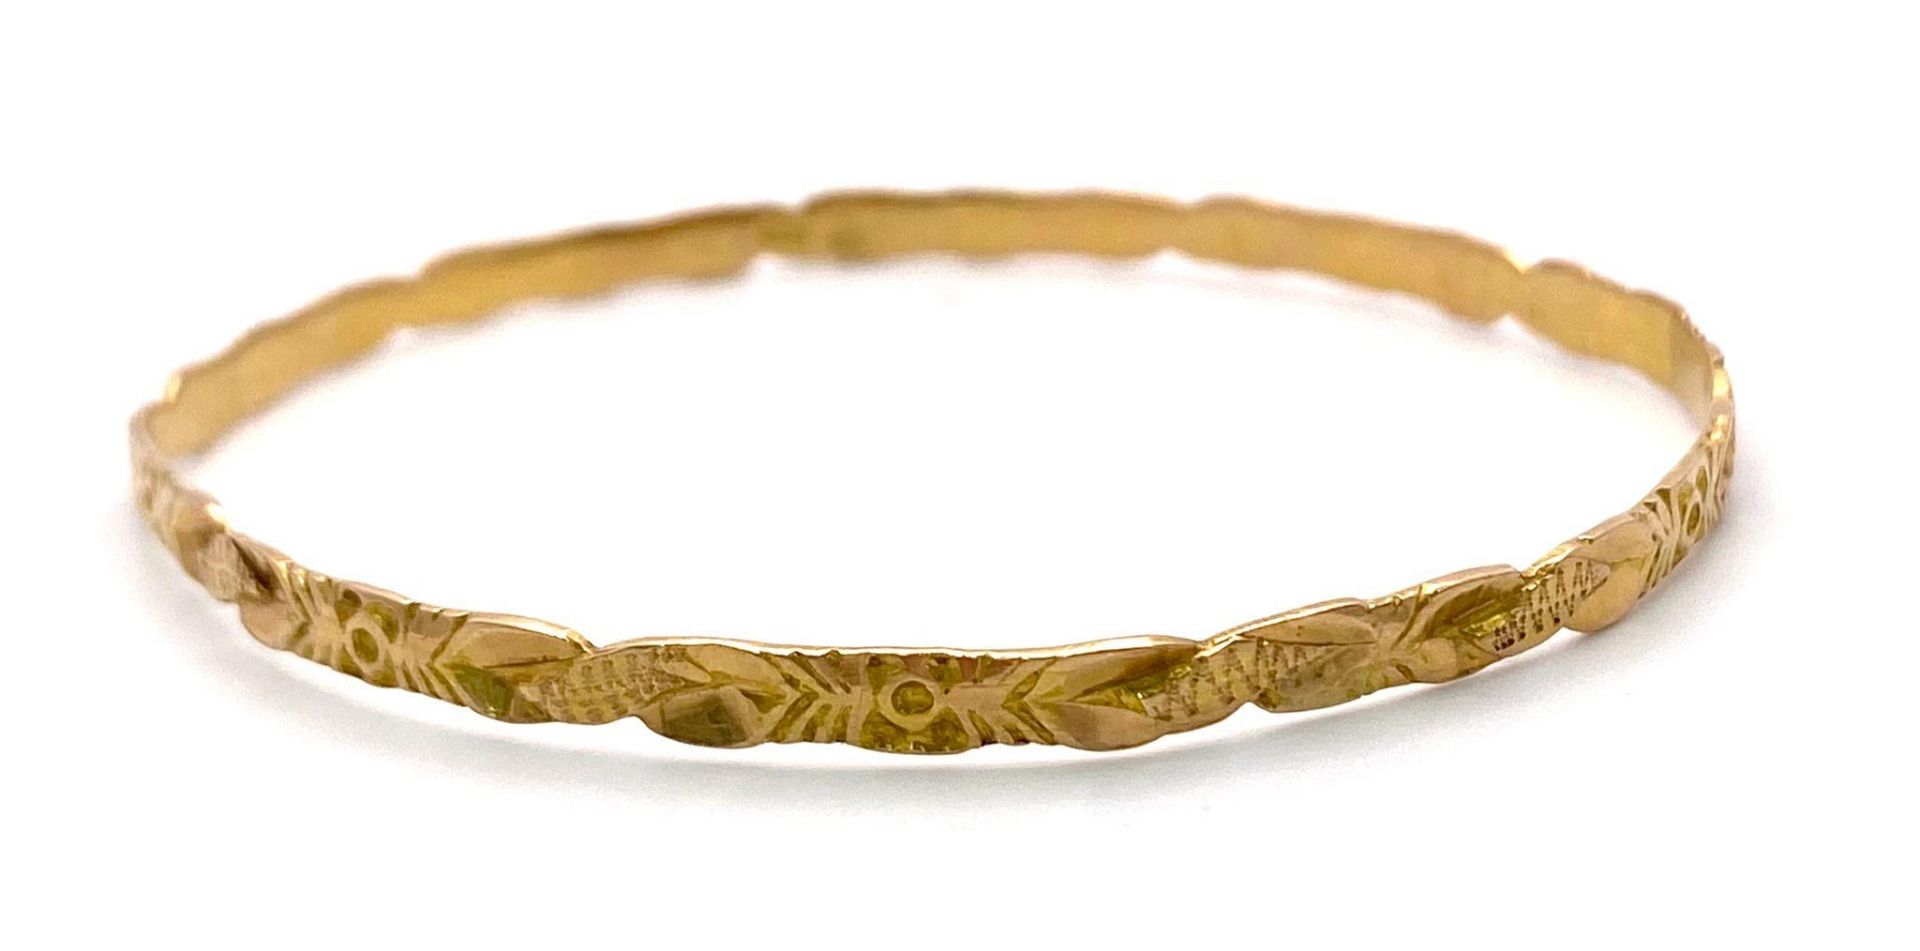 A Vintage 18K Gold Bangle with Decorative Twist Design. 7.67g weight.